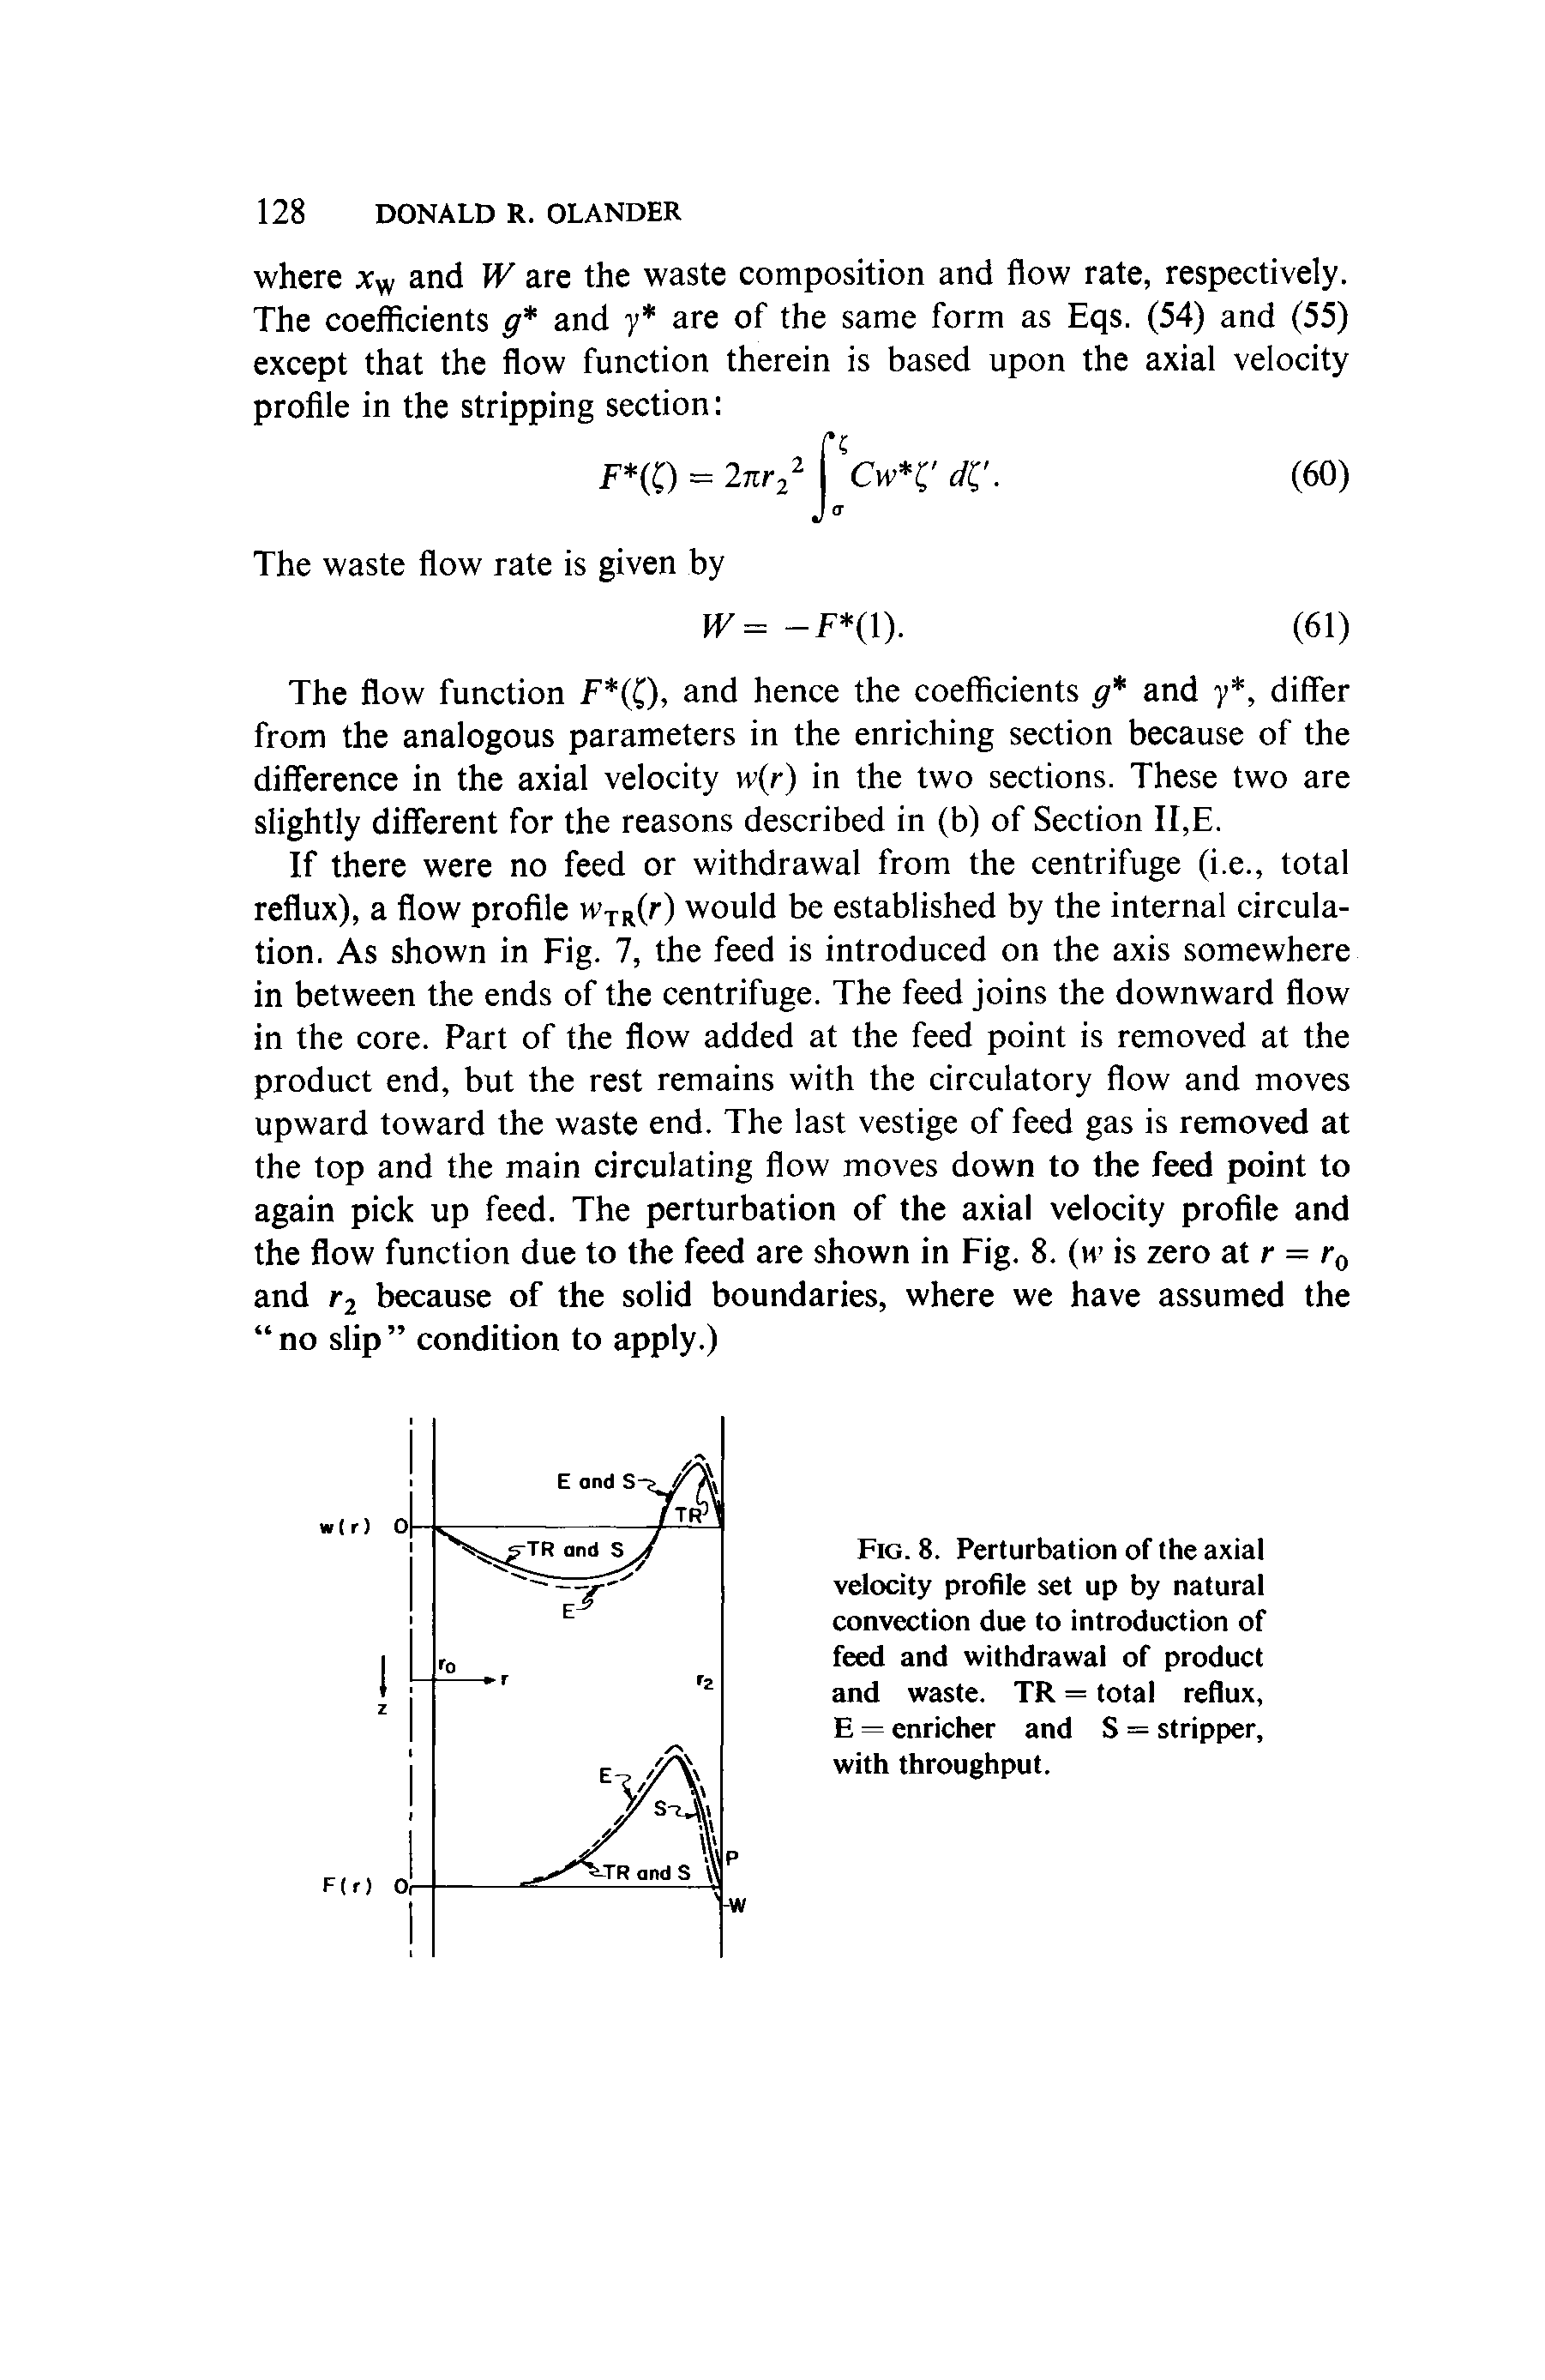 Fig. 8. Perturbation of the axial velocity profile set up by natural convection due to introduction of feed and withdrawal of product and waste. TR = total reflux, E = enricher and S = stripper, with throughput.